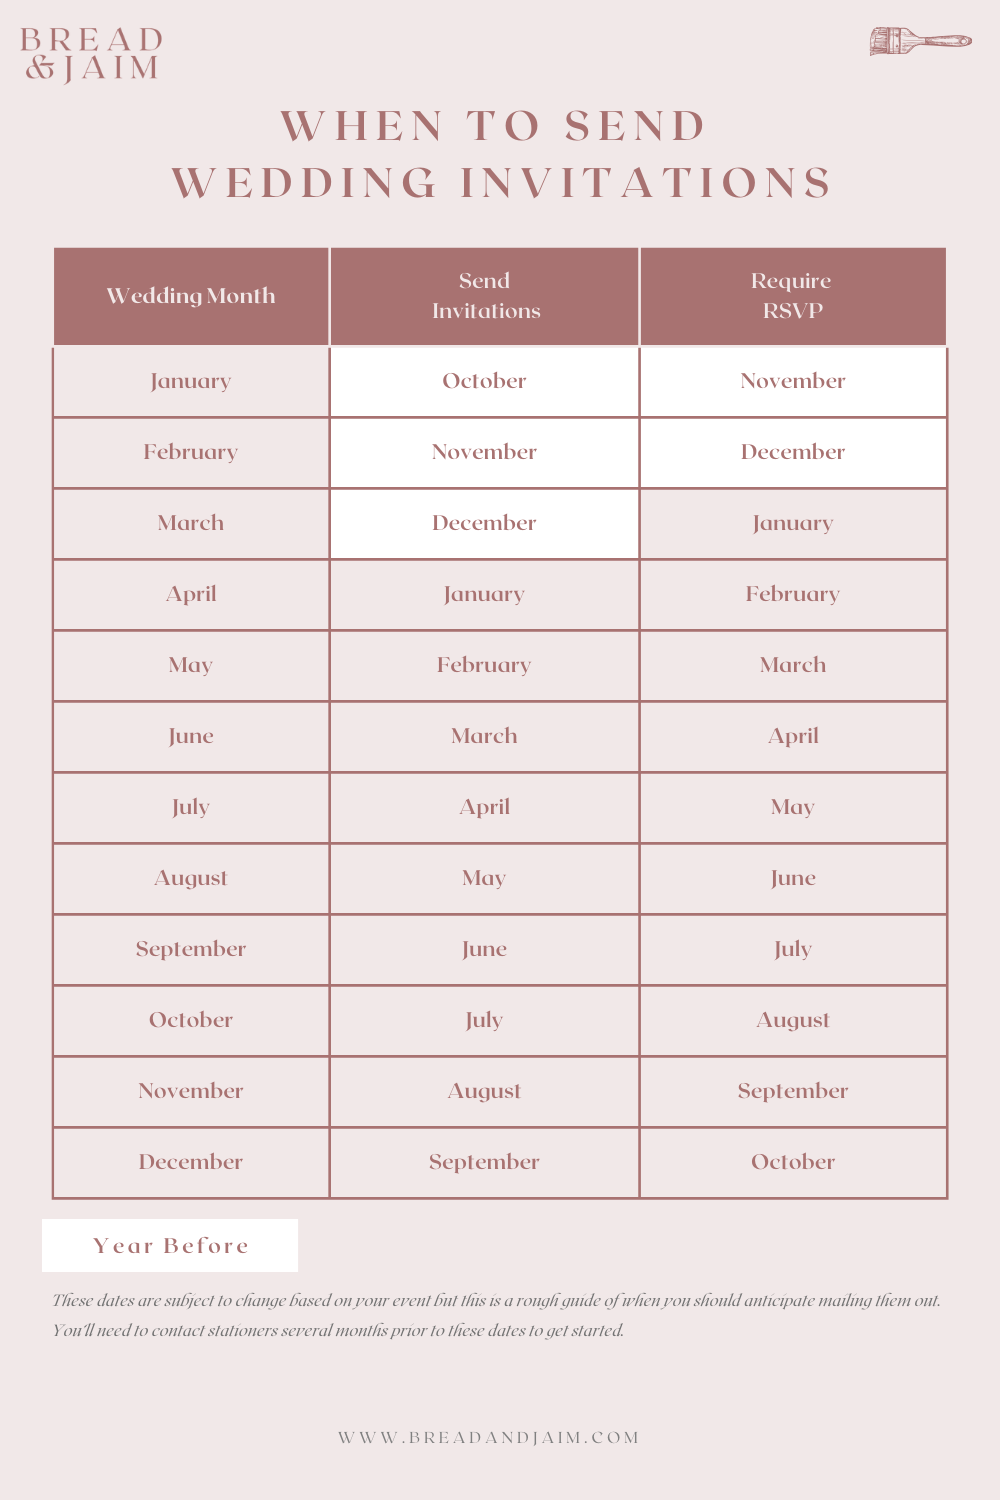 chart of when to send wedding invitations by month